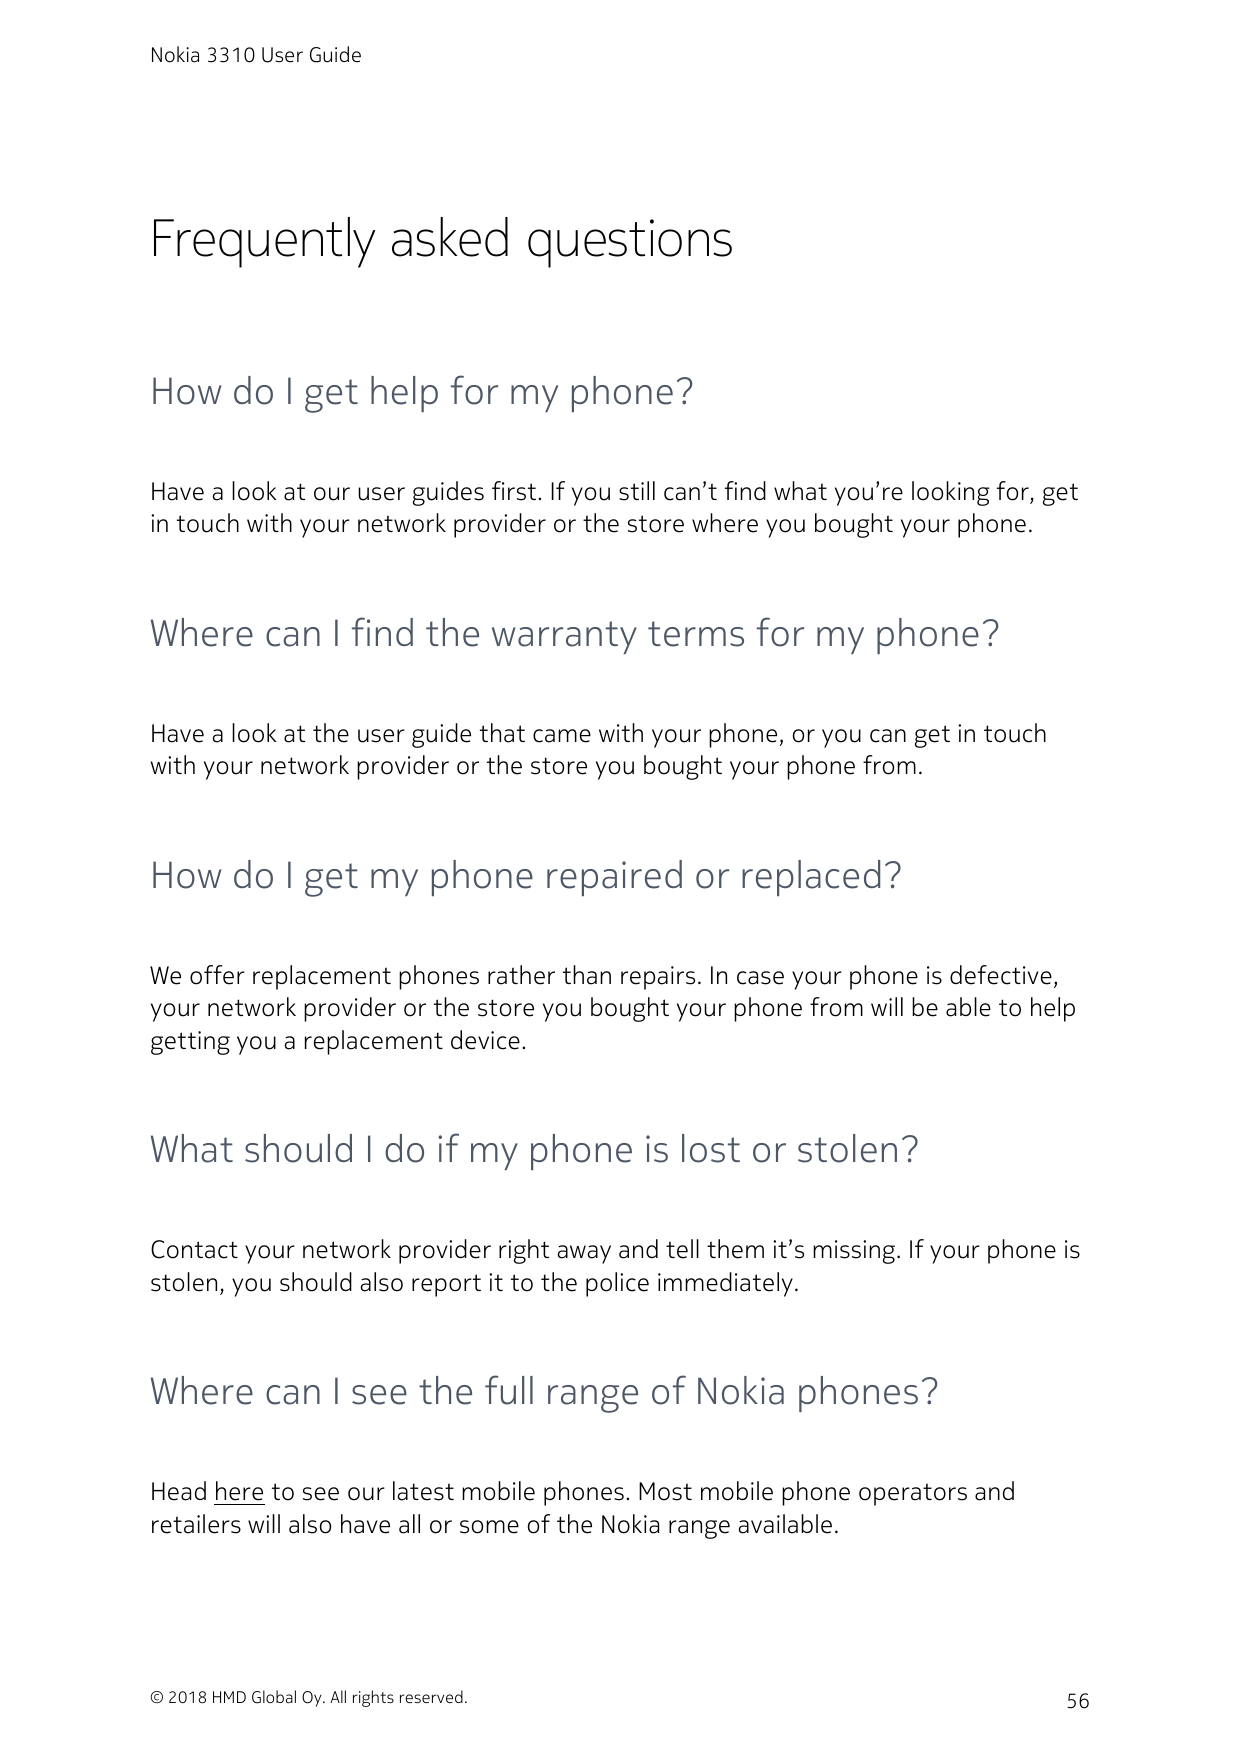 Nokia 3310 User GuideFrequently asked questionsHow do I get help for my phone?Have a look at our user guides first. If you still